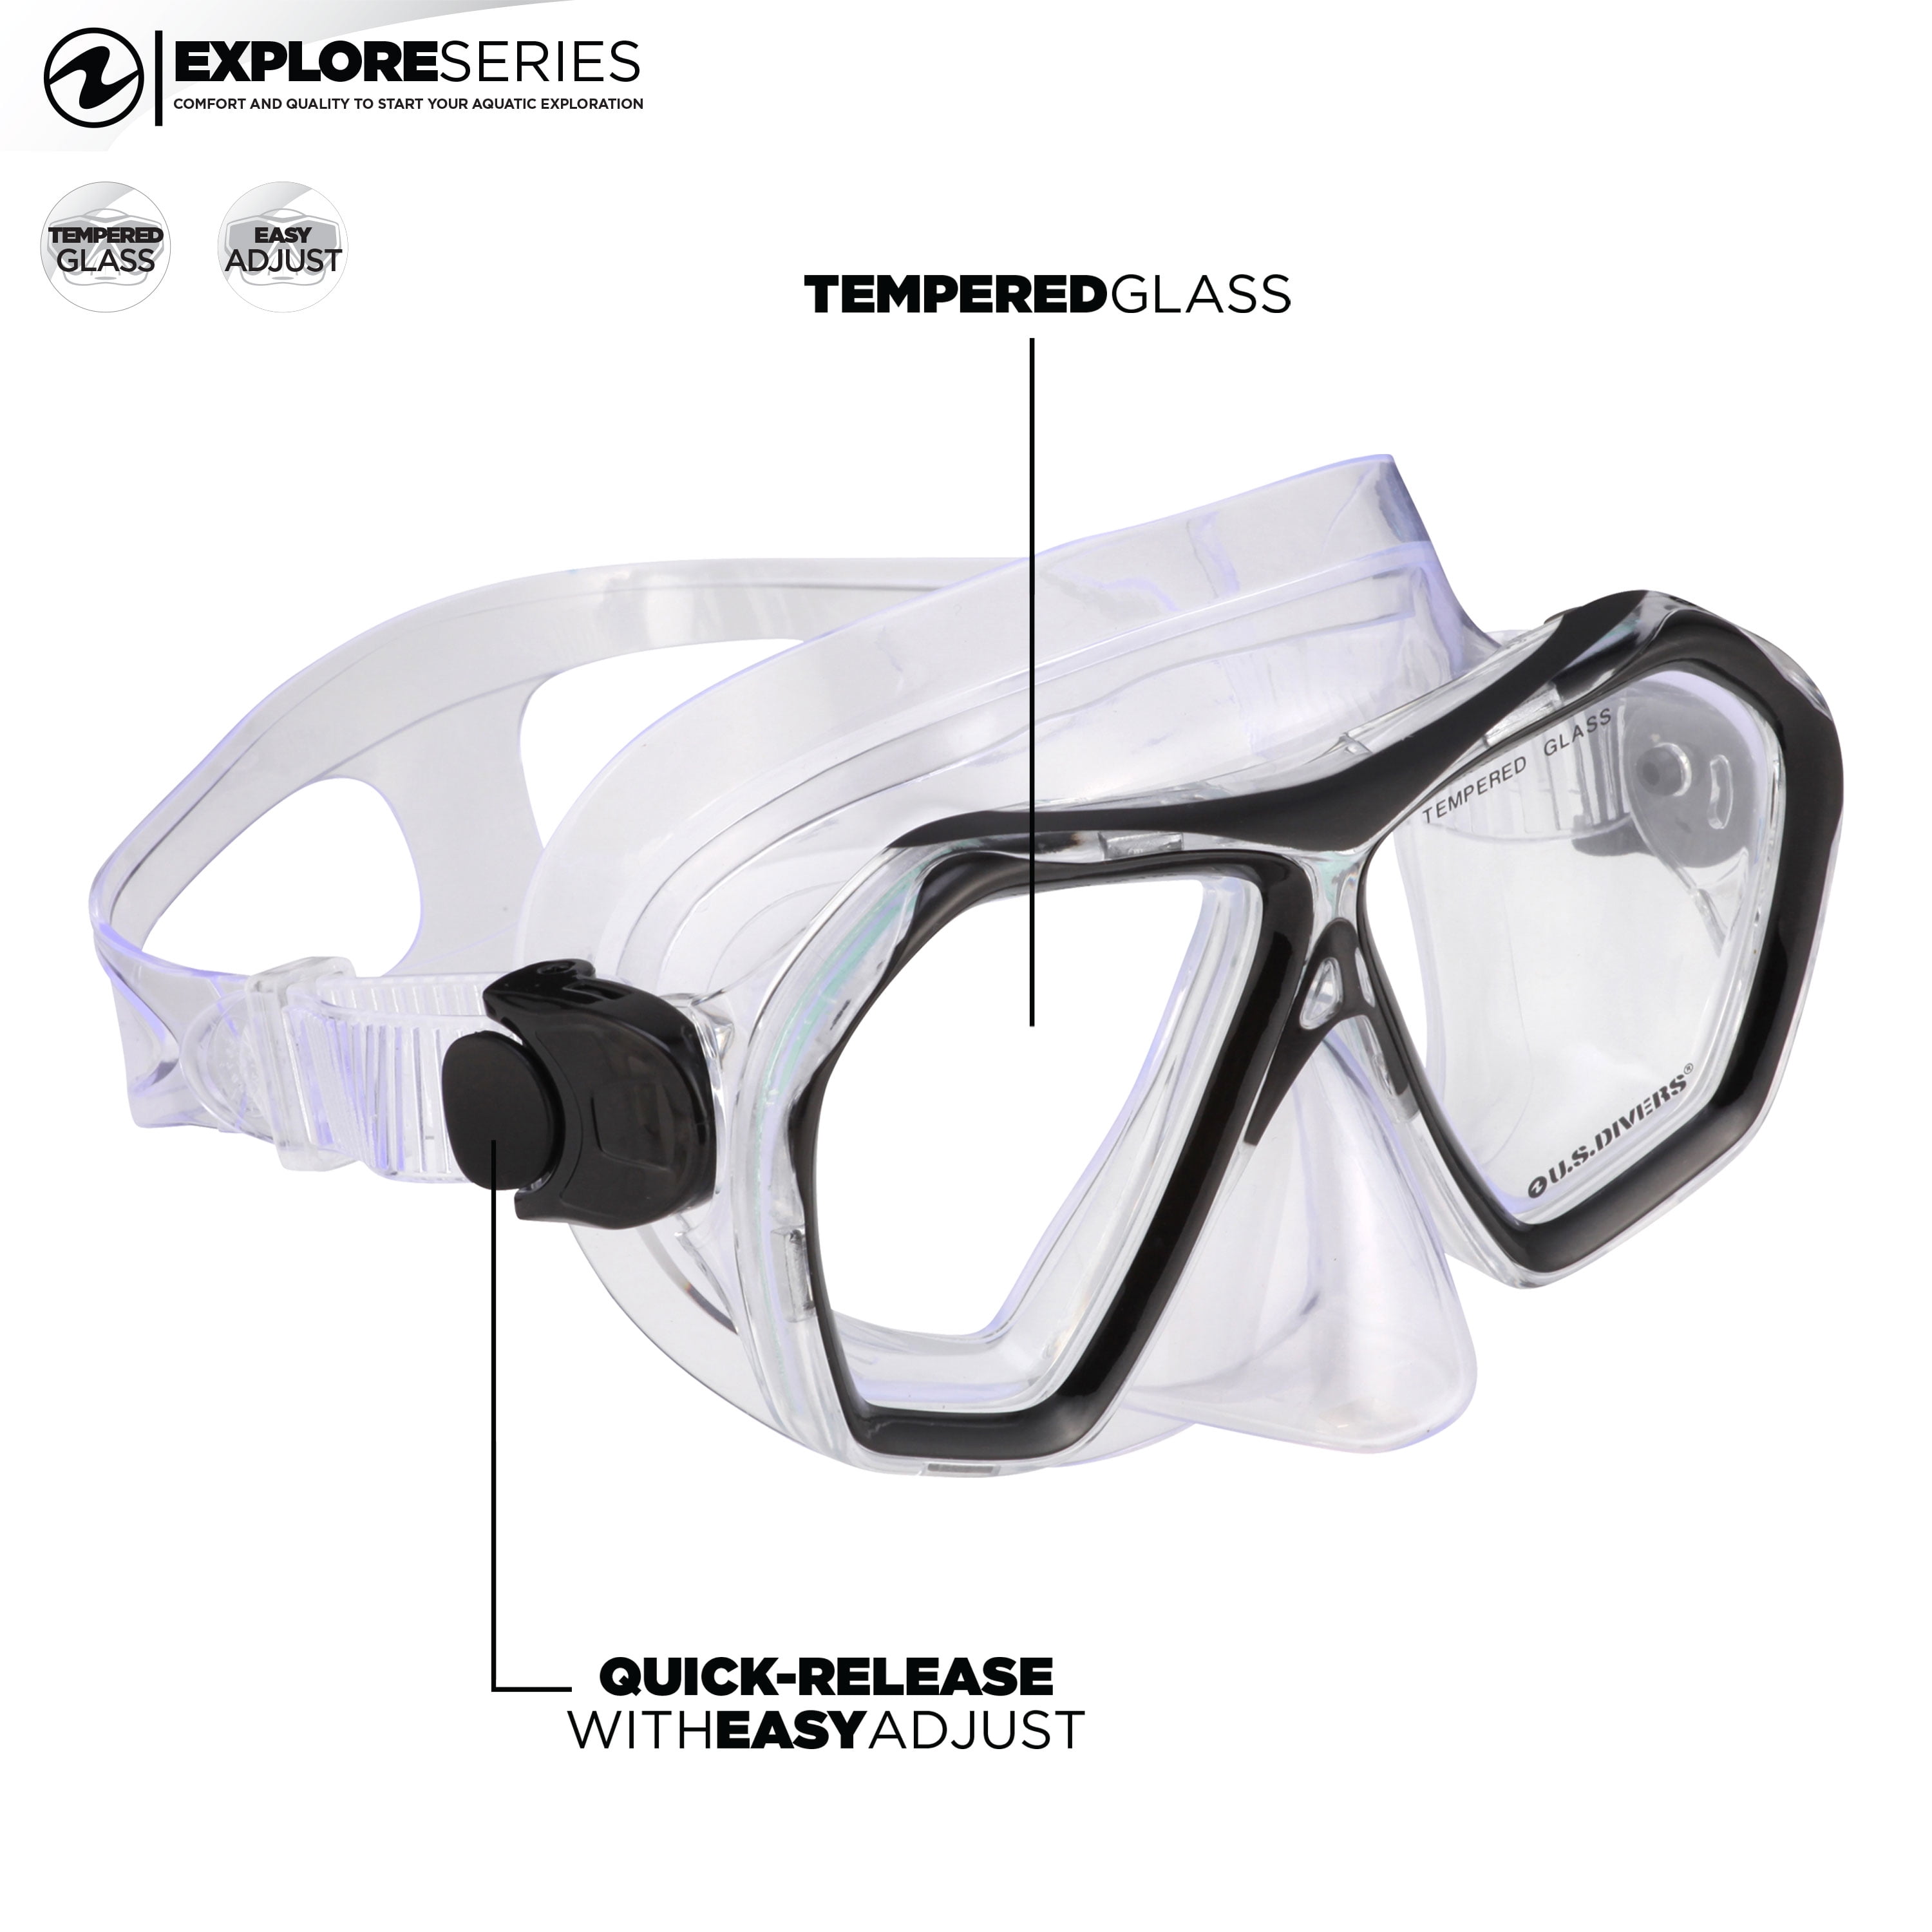 WOOD GRAIN FRAME LOOK FULL FACE SNORKELLING  MASK WITH TEMPERED GLASS 